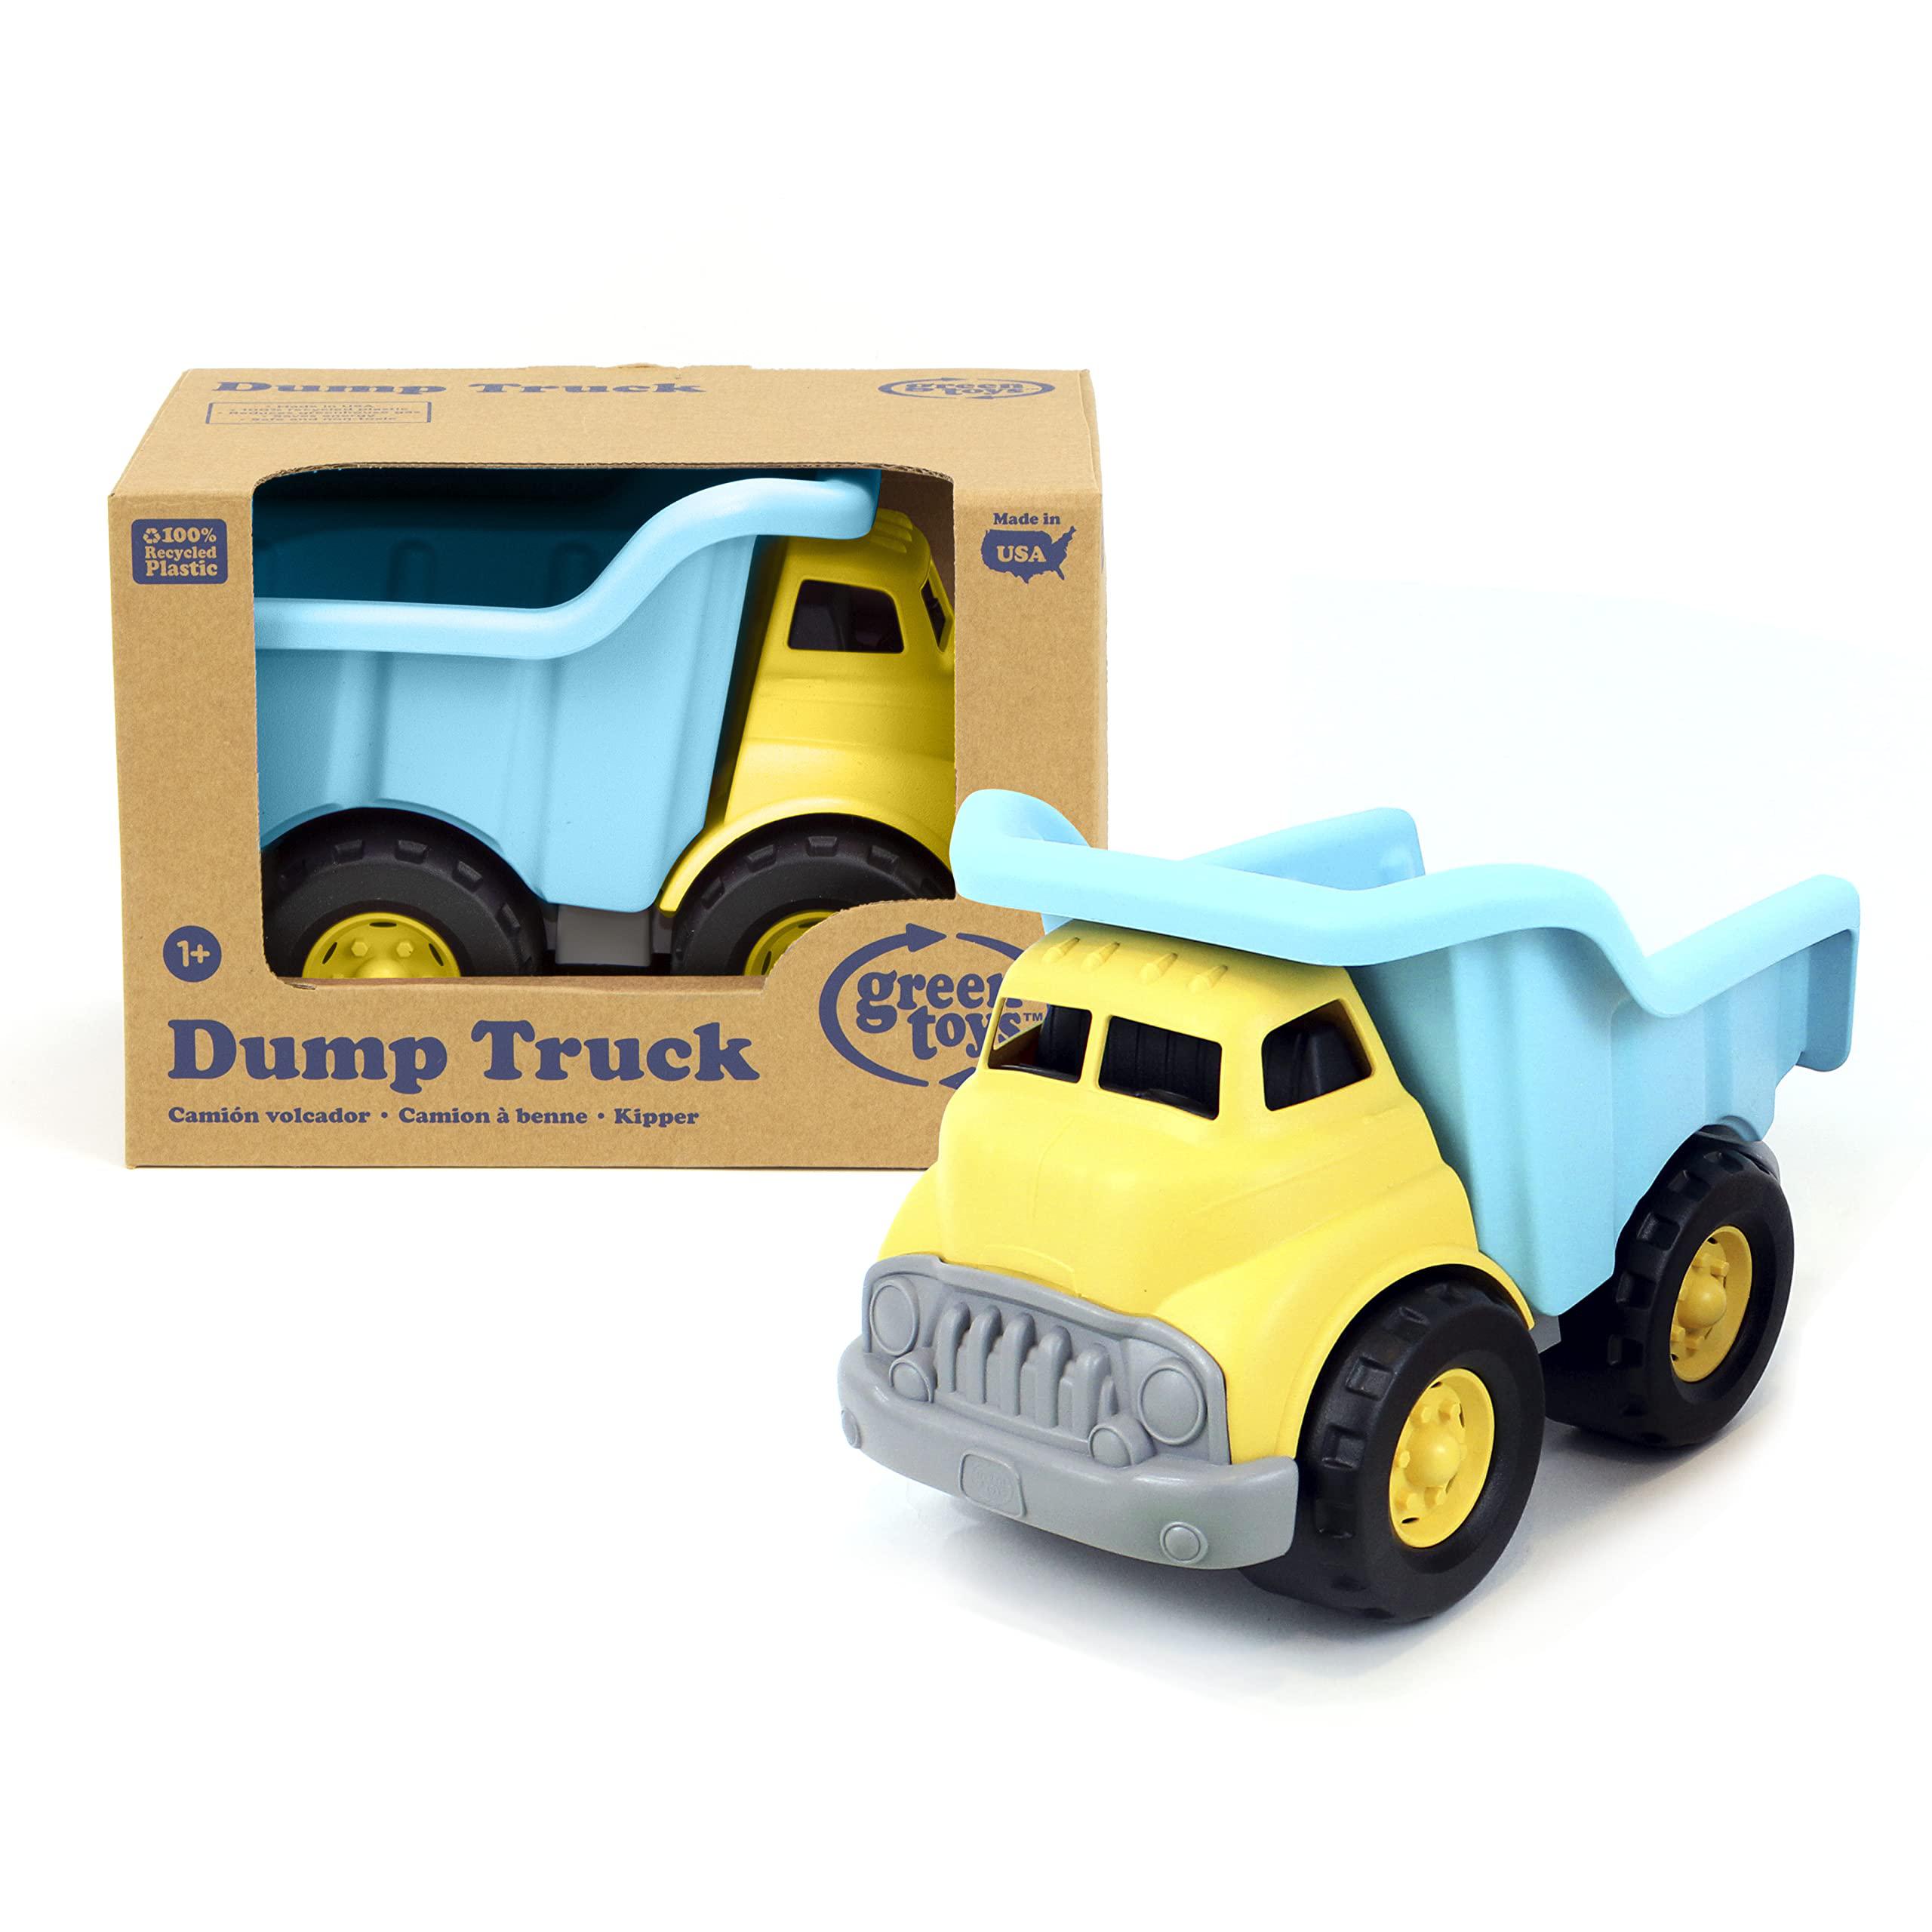 green toys dump truck - turquoise/yellow